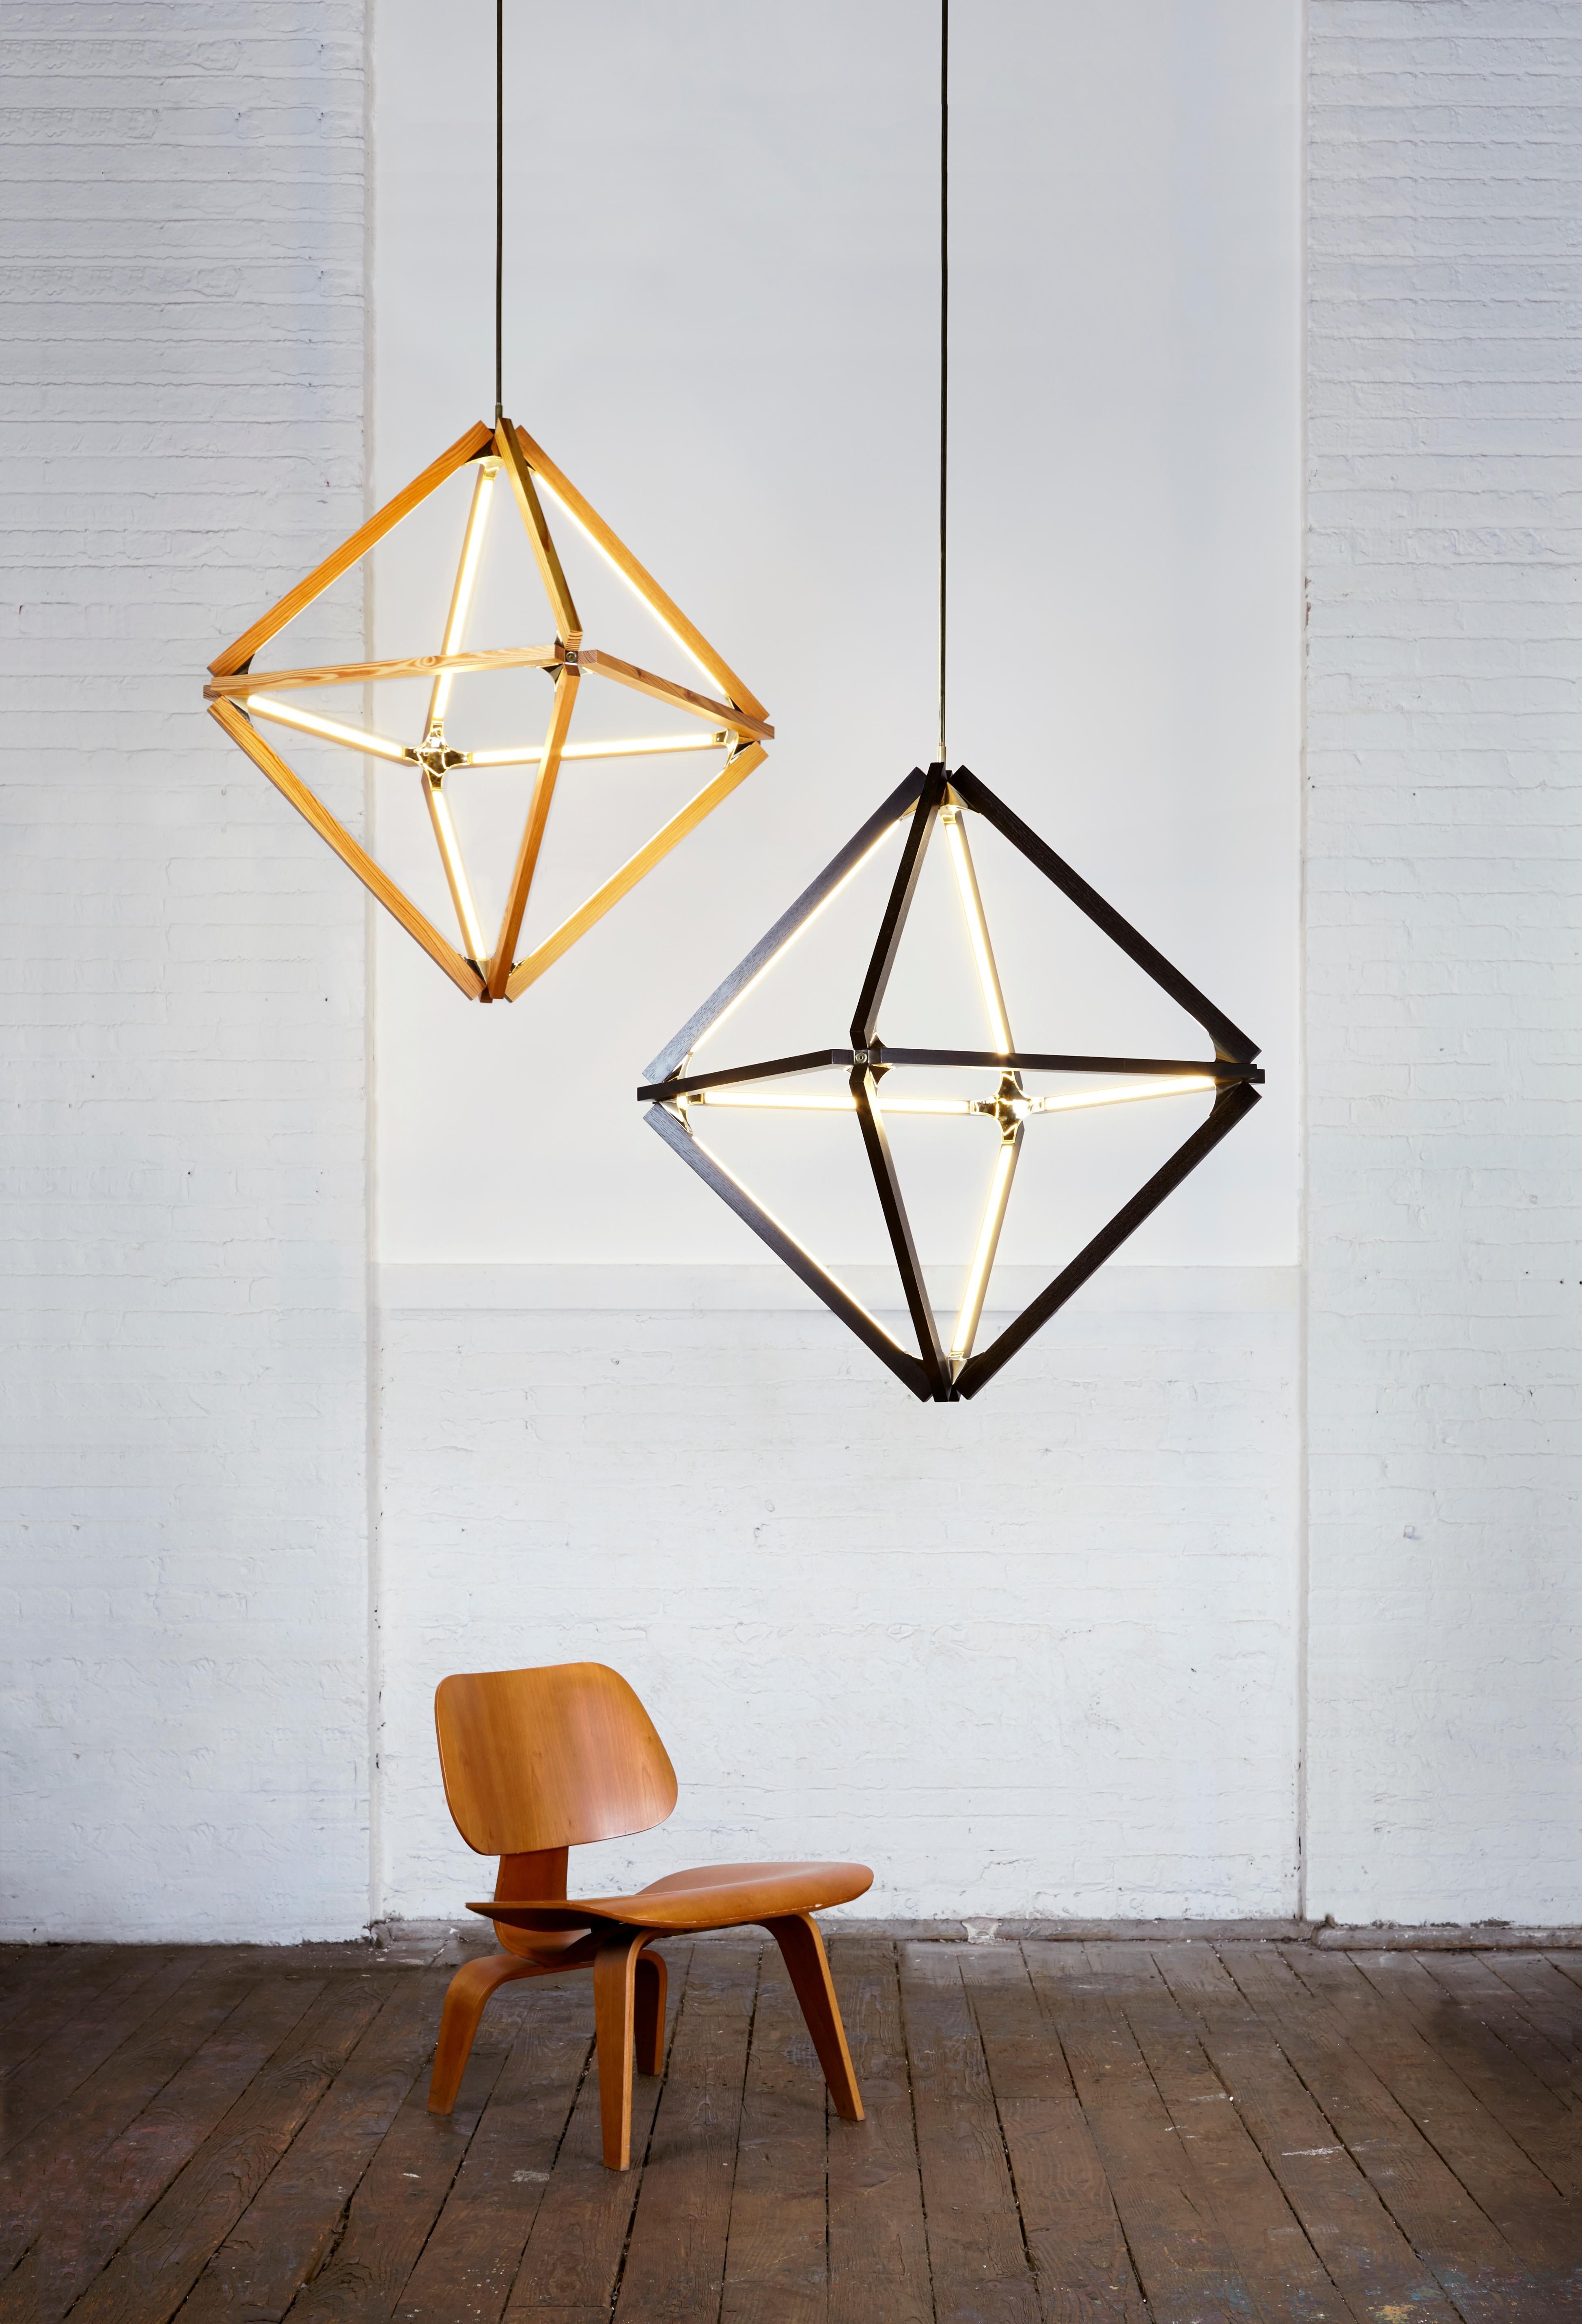 Diamond chandeliers is a continued exploration into the timeless appeal of octahedral and hexagonal forms in nature. Stickbulb takes this classical form in a new direction by using its signature wooden bulb to echo the shape of the prized gemstone.